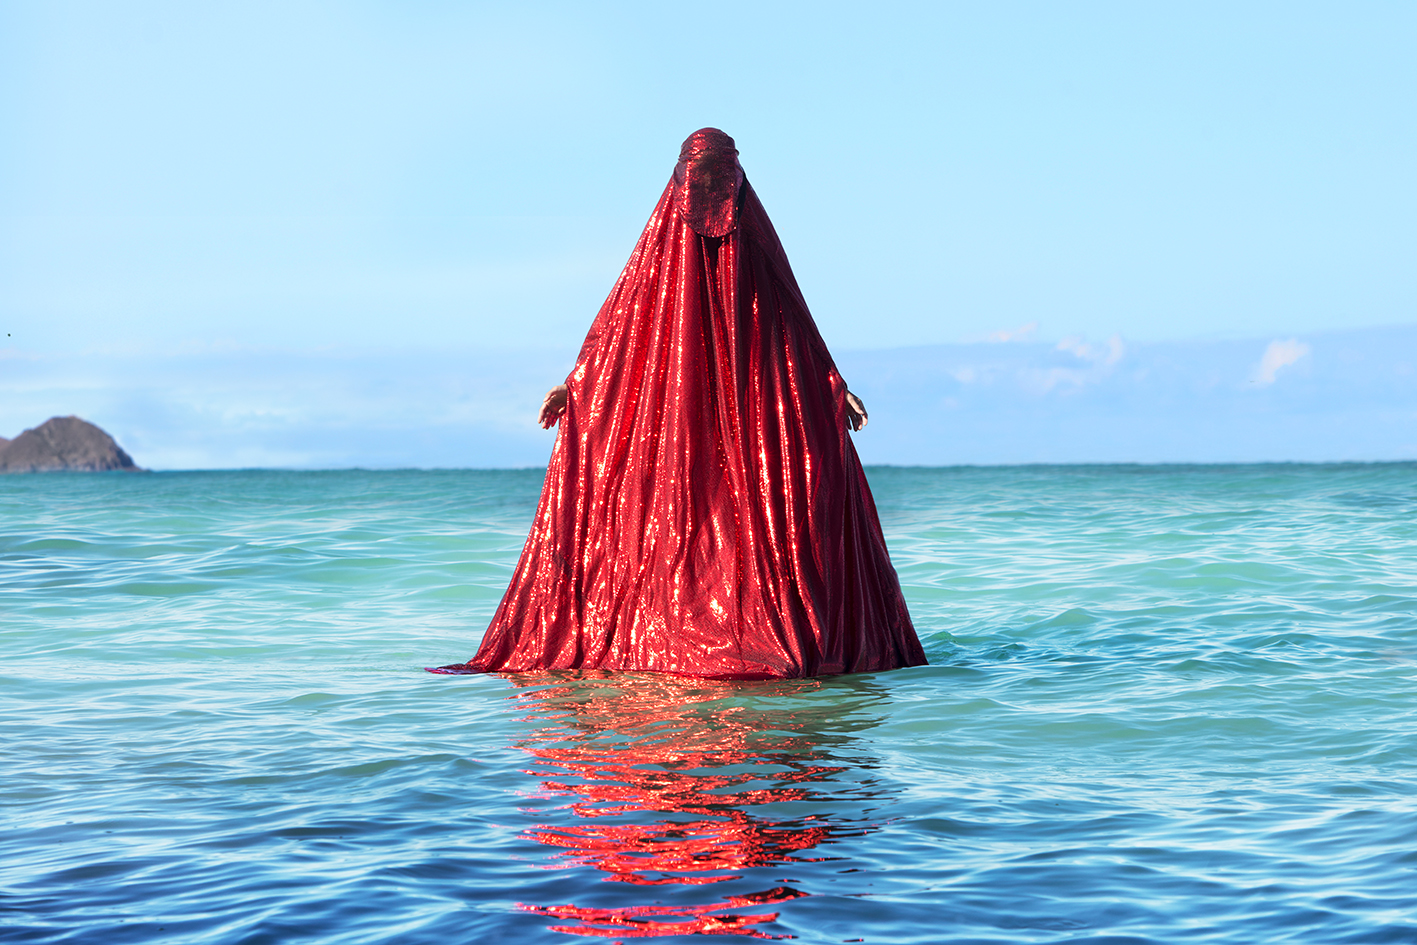 Woman cloaked in red appearing to stand on top of the ocean water